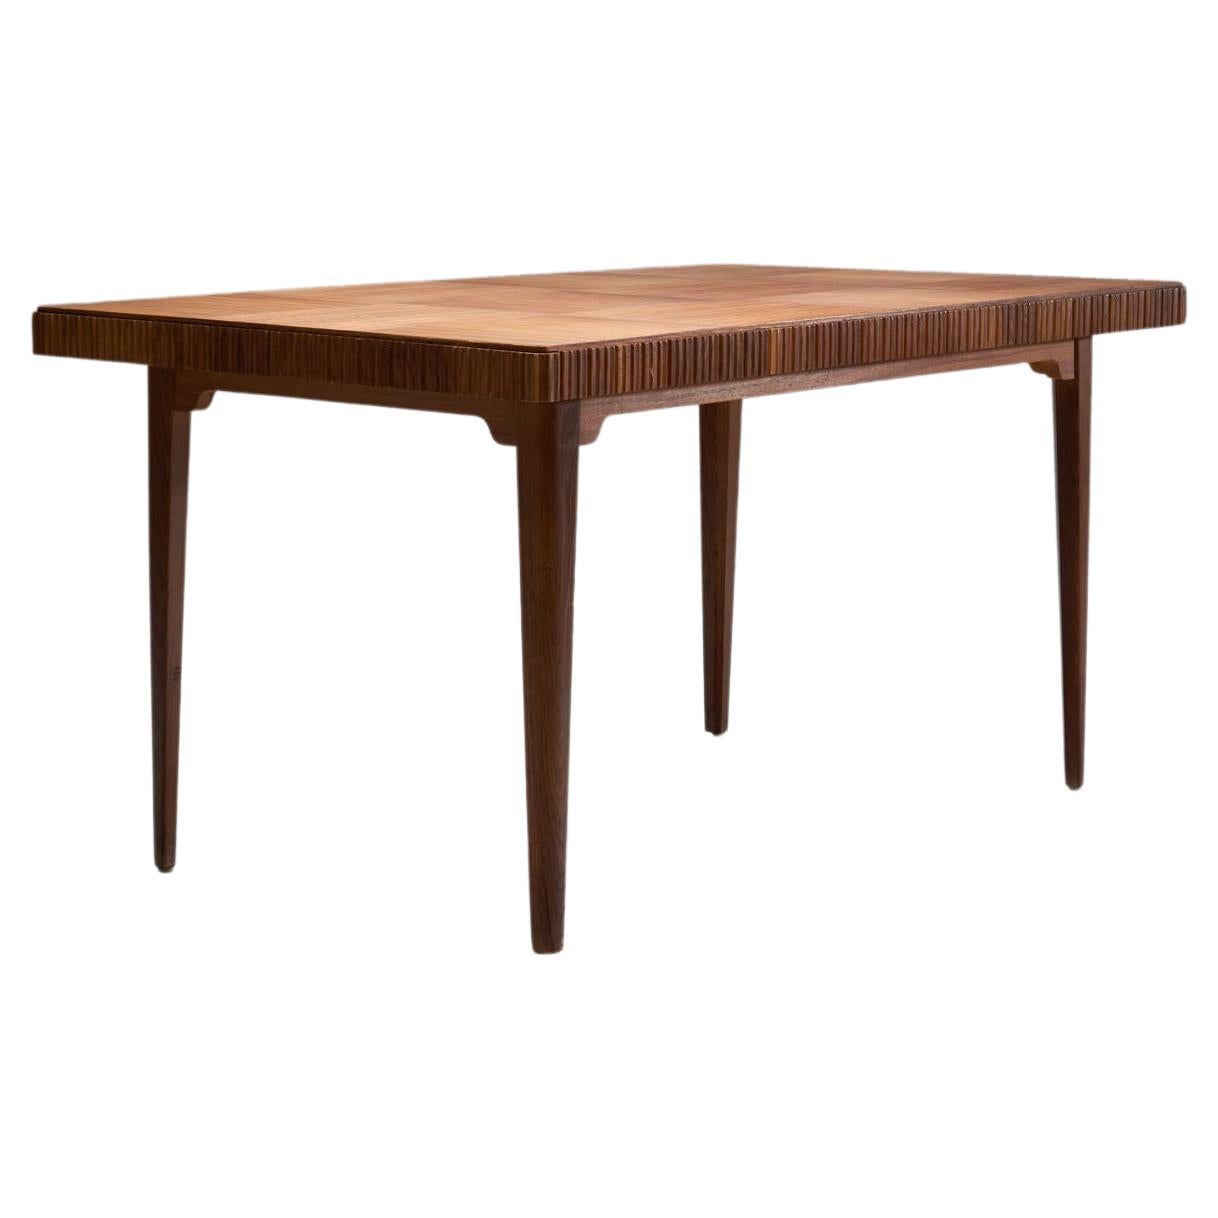 Wood Dining Table by Carl Axel Acking for Bodafors, ca 1940s-1950s For Sale